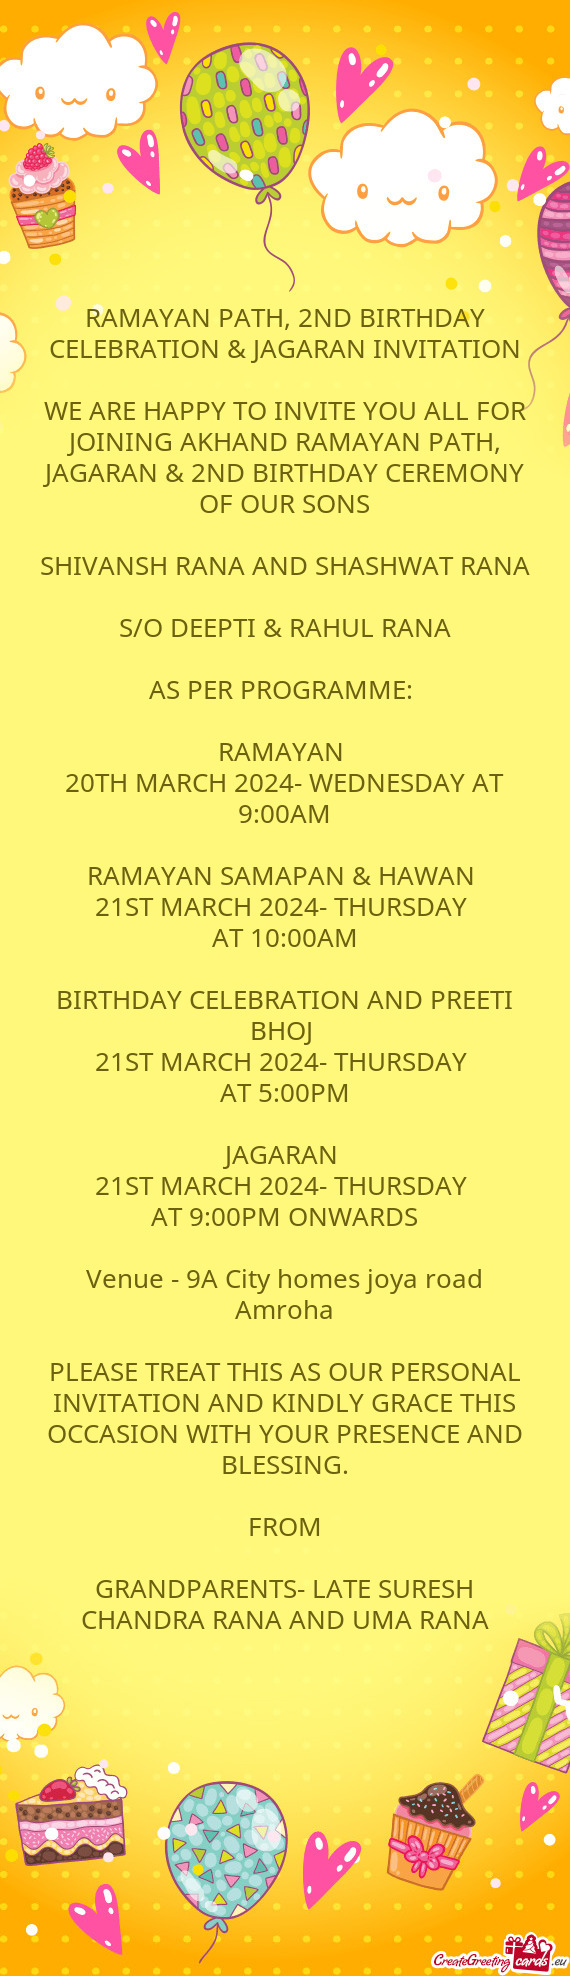 WE ARE HAPPY TO INVITE YOU ALL FOR JOINING AKHAND RAMAYAN PATH, JAGARAN & 2ND BIRTHDAY CEREMONY OF O